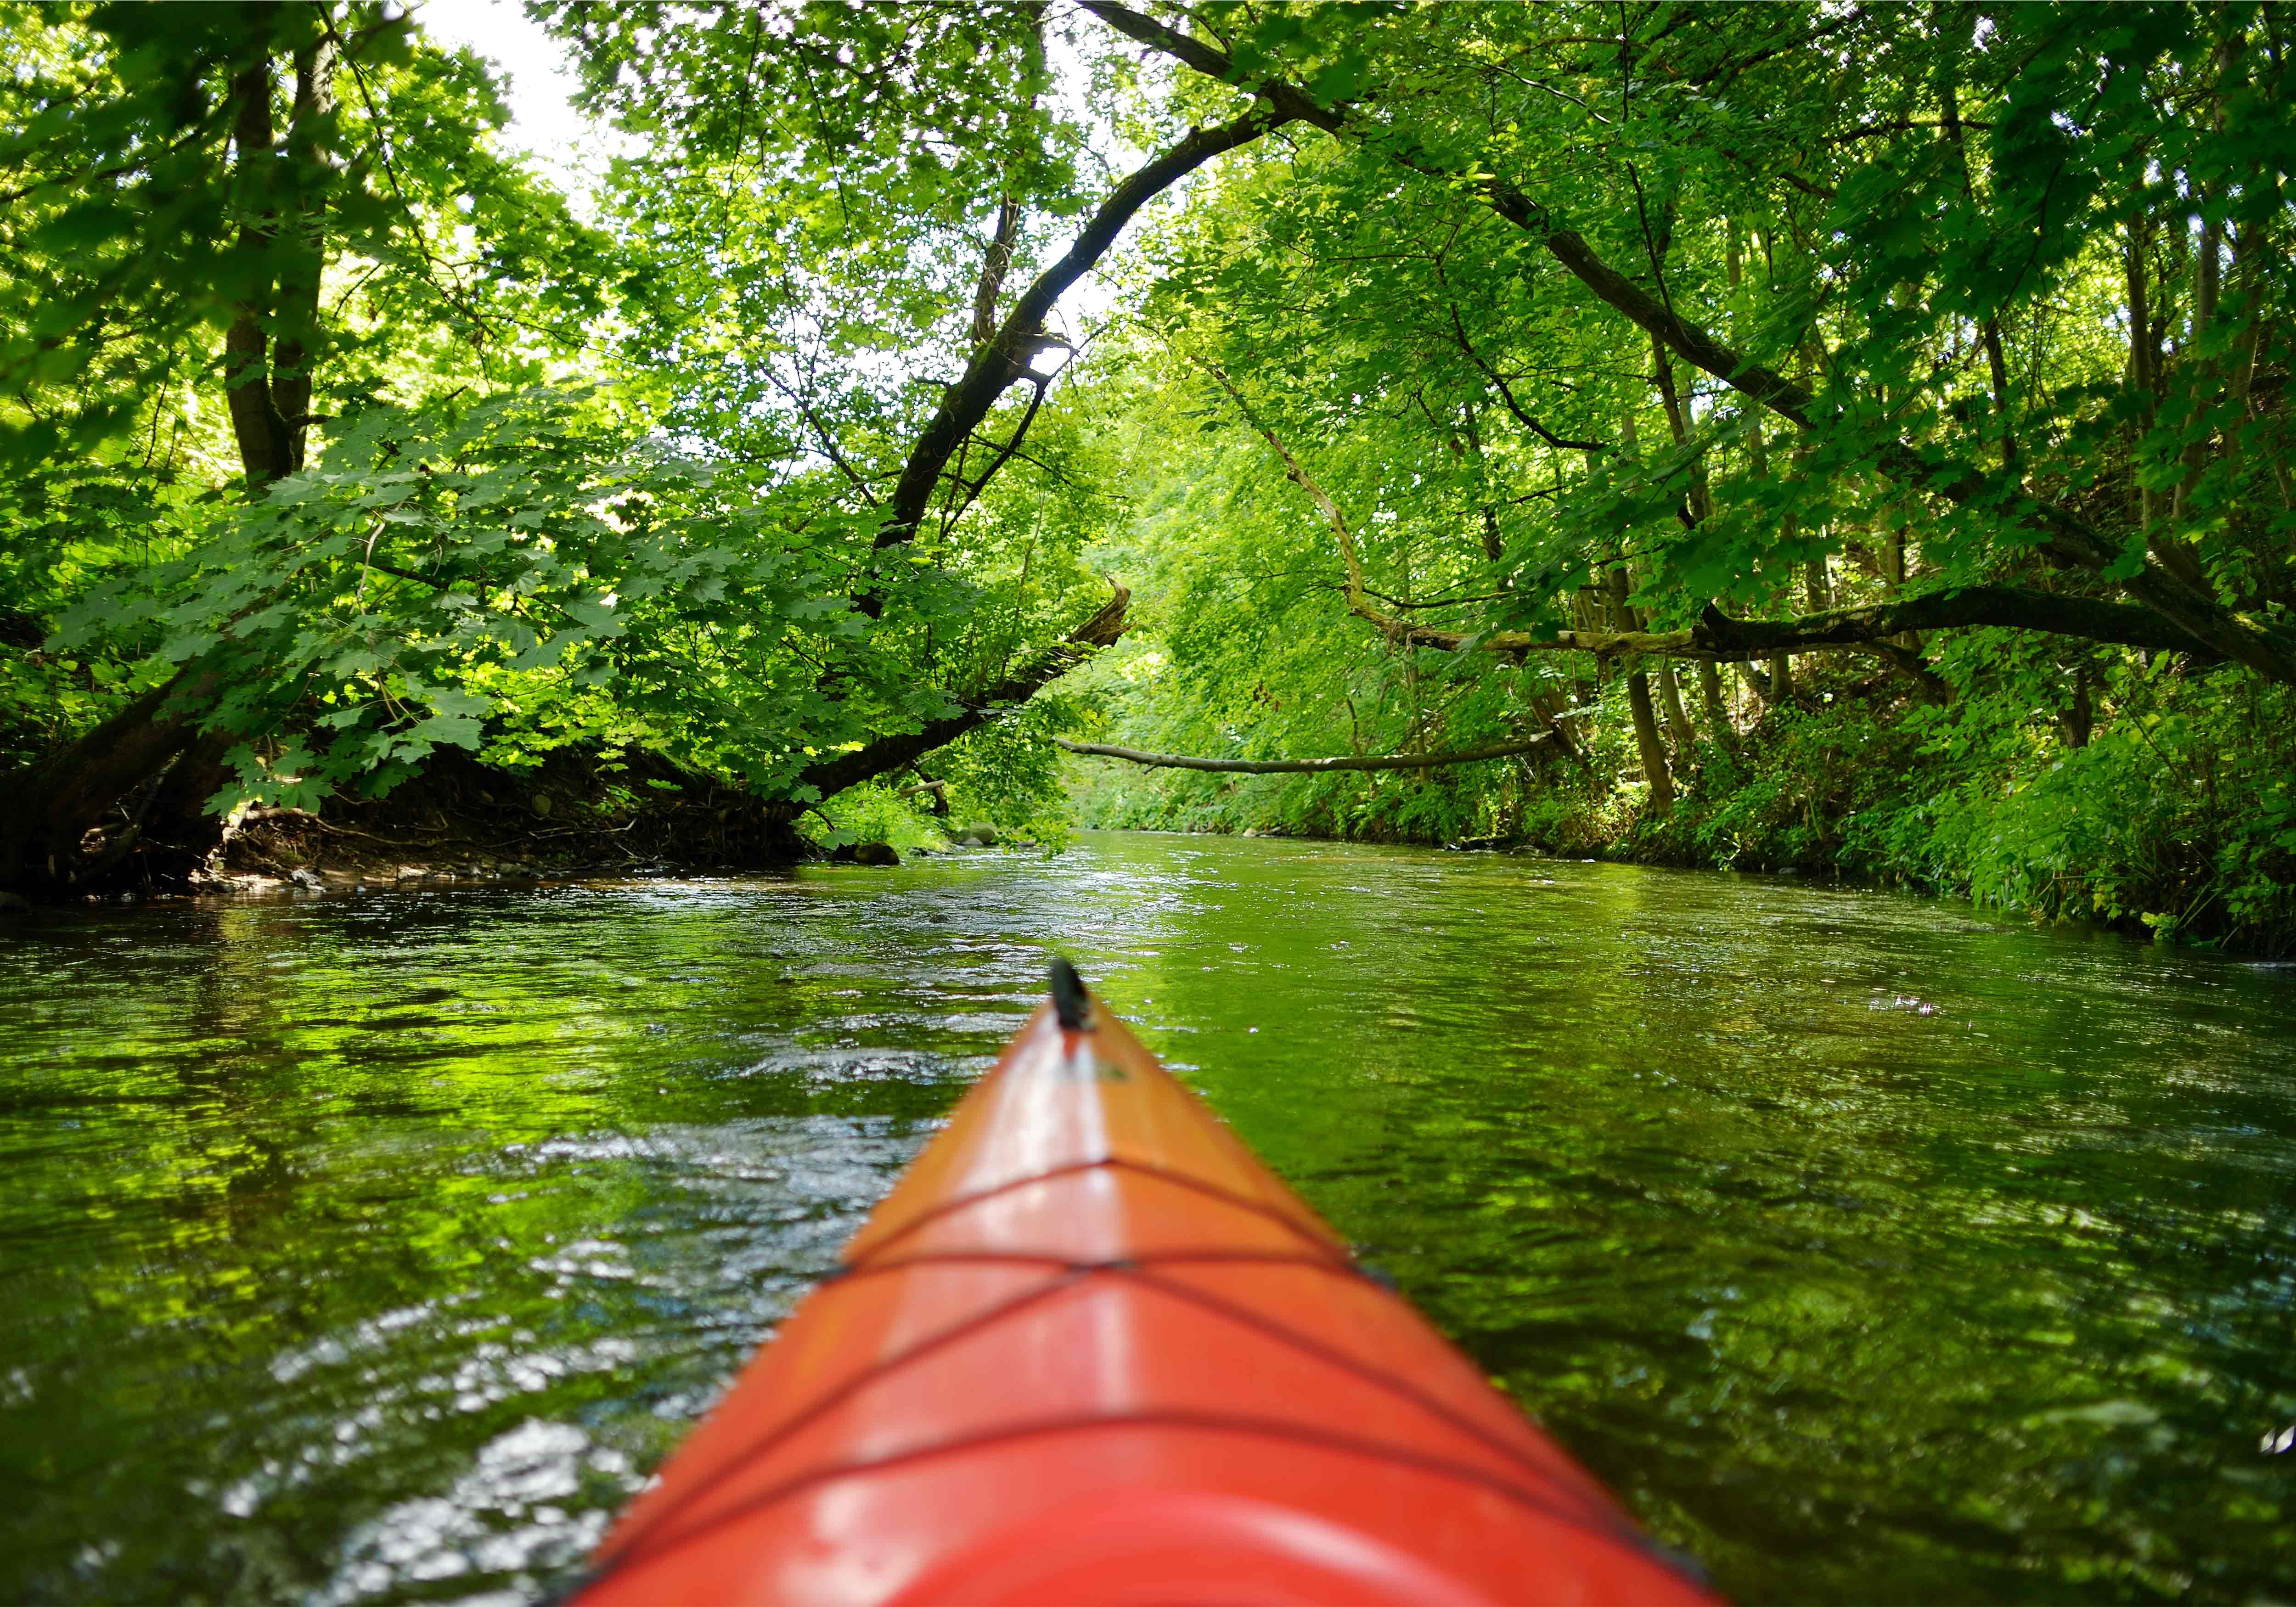 Kayaking down a tree covered river